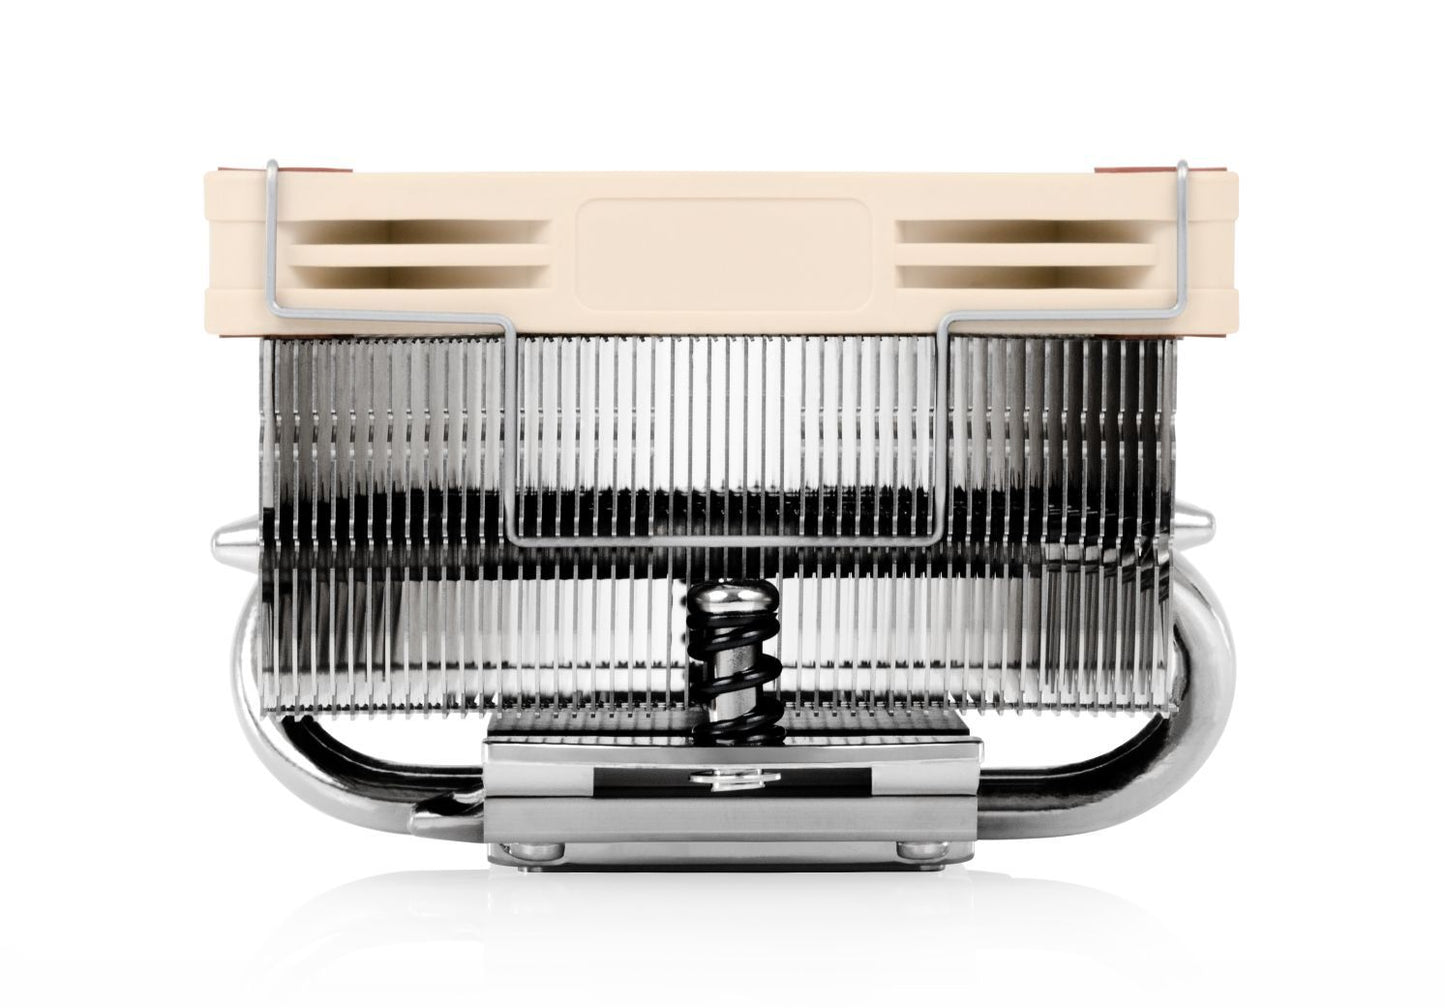 Noctua NH-L9x65  SE-AM4 Cooler complete premium-quality solution for AM4/AM5-based ITX builds and HTPC systems